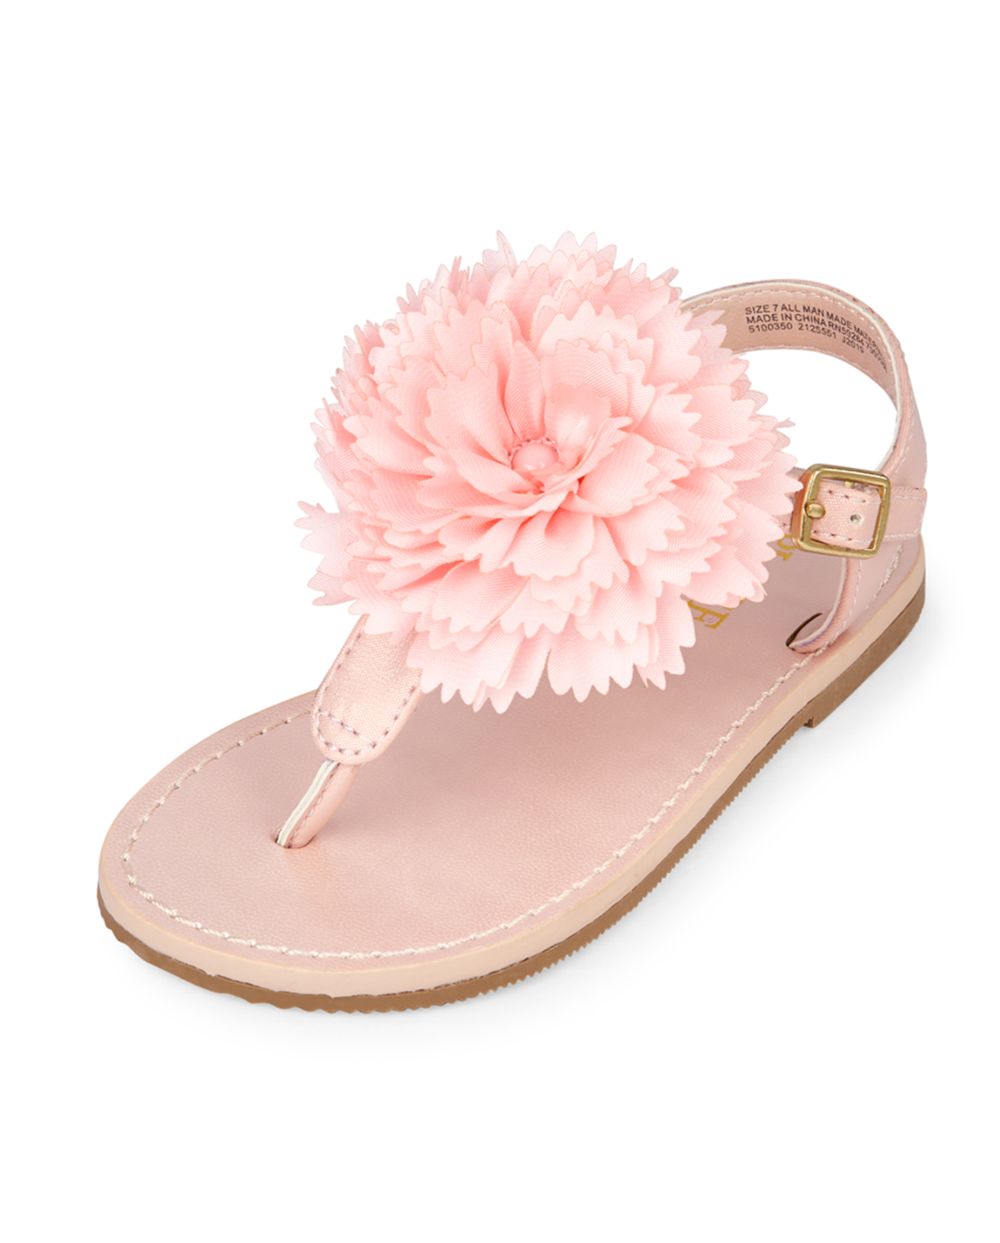 Toddler Girls Flower Faux Leather T-Strap Sandals